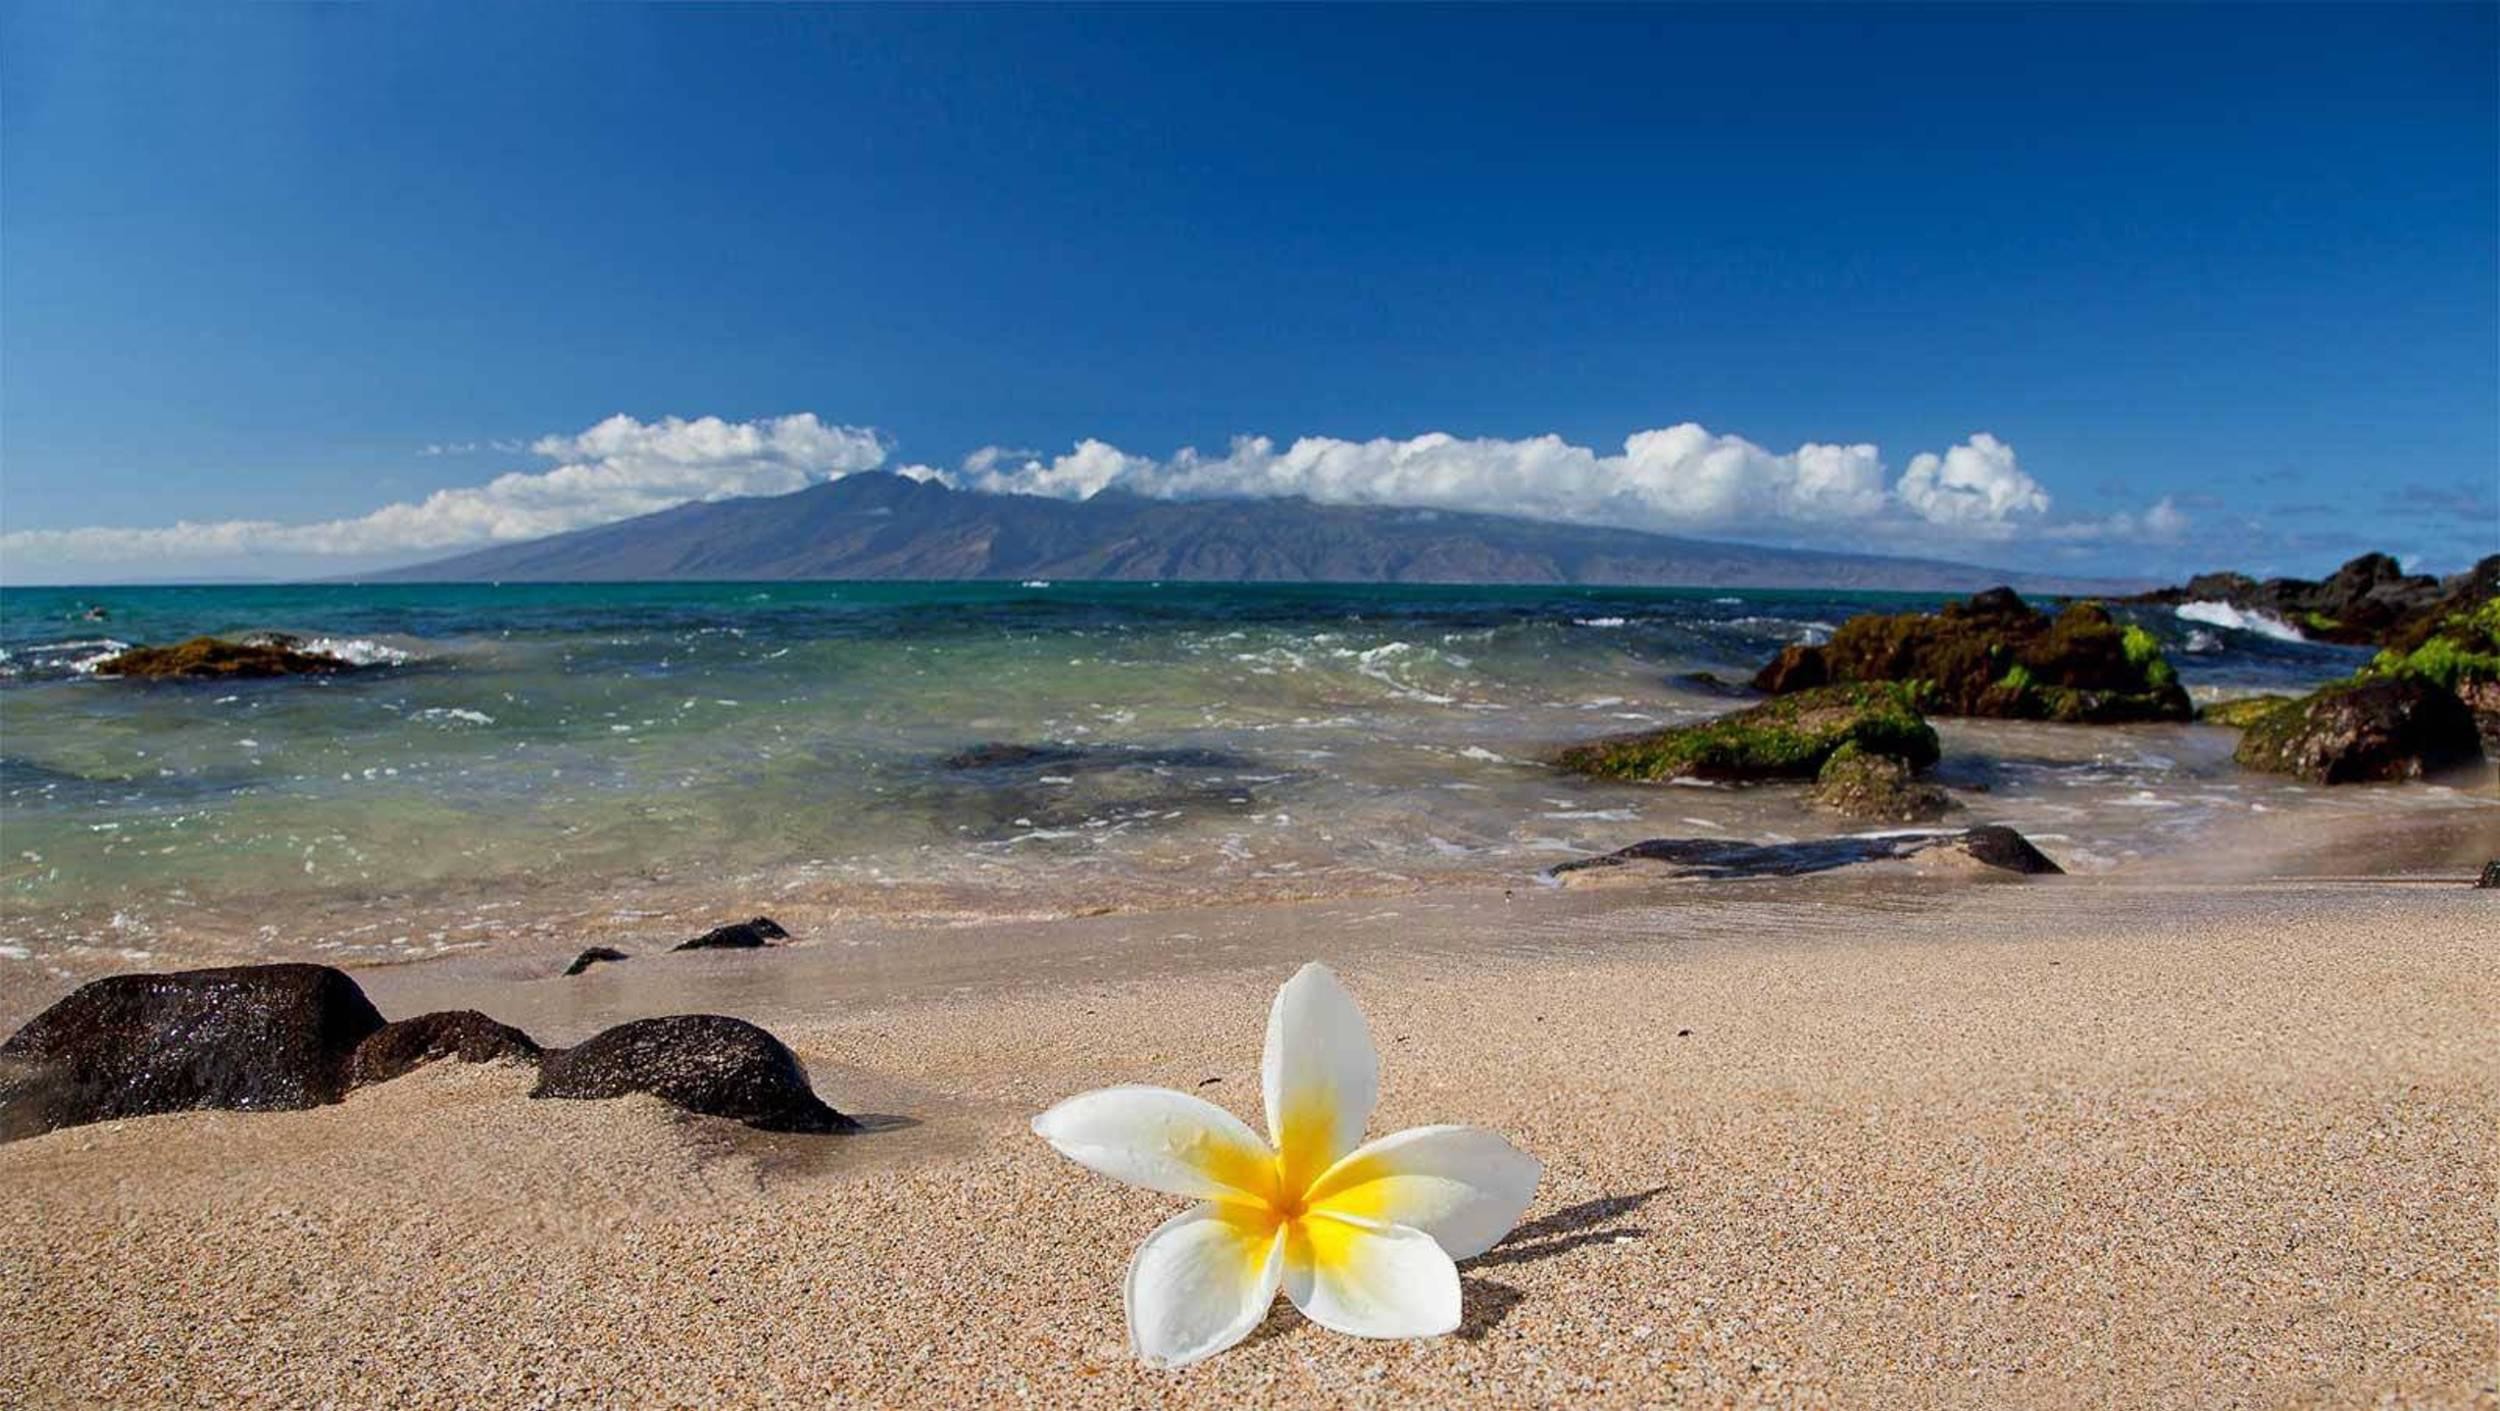 2500x1411 Hawaii Flower Wallpapers High Quality For Desktop Wallpaper 2500 x 1411 px  1.04 MB wave iphone